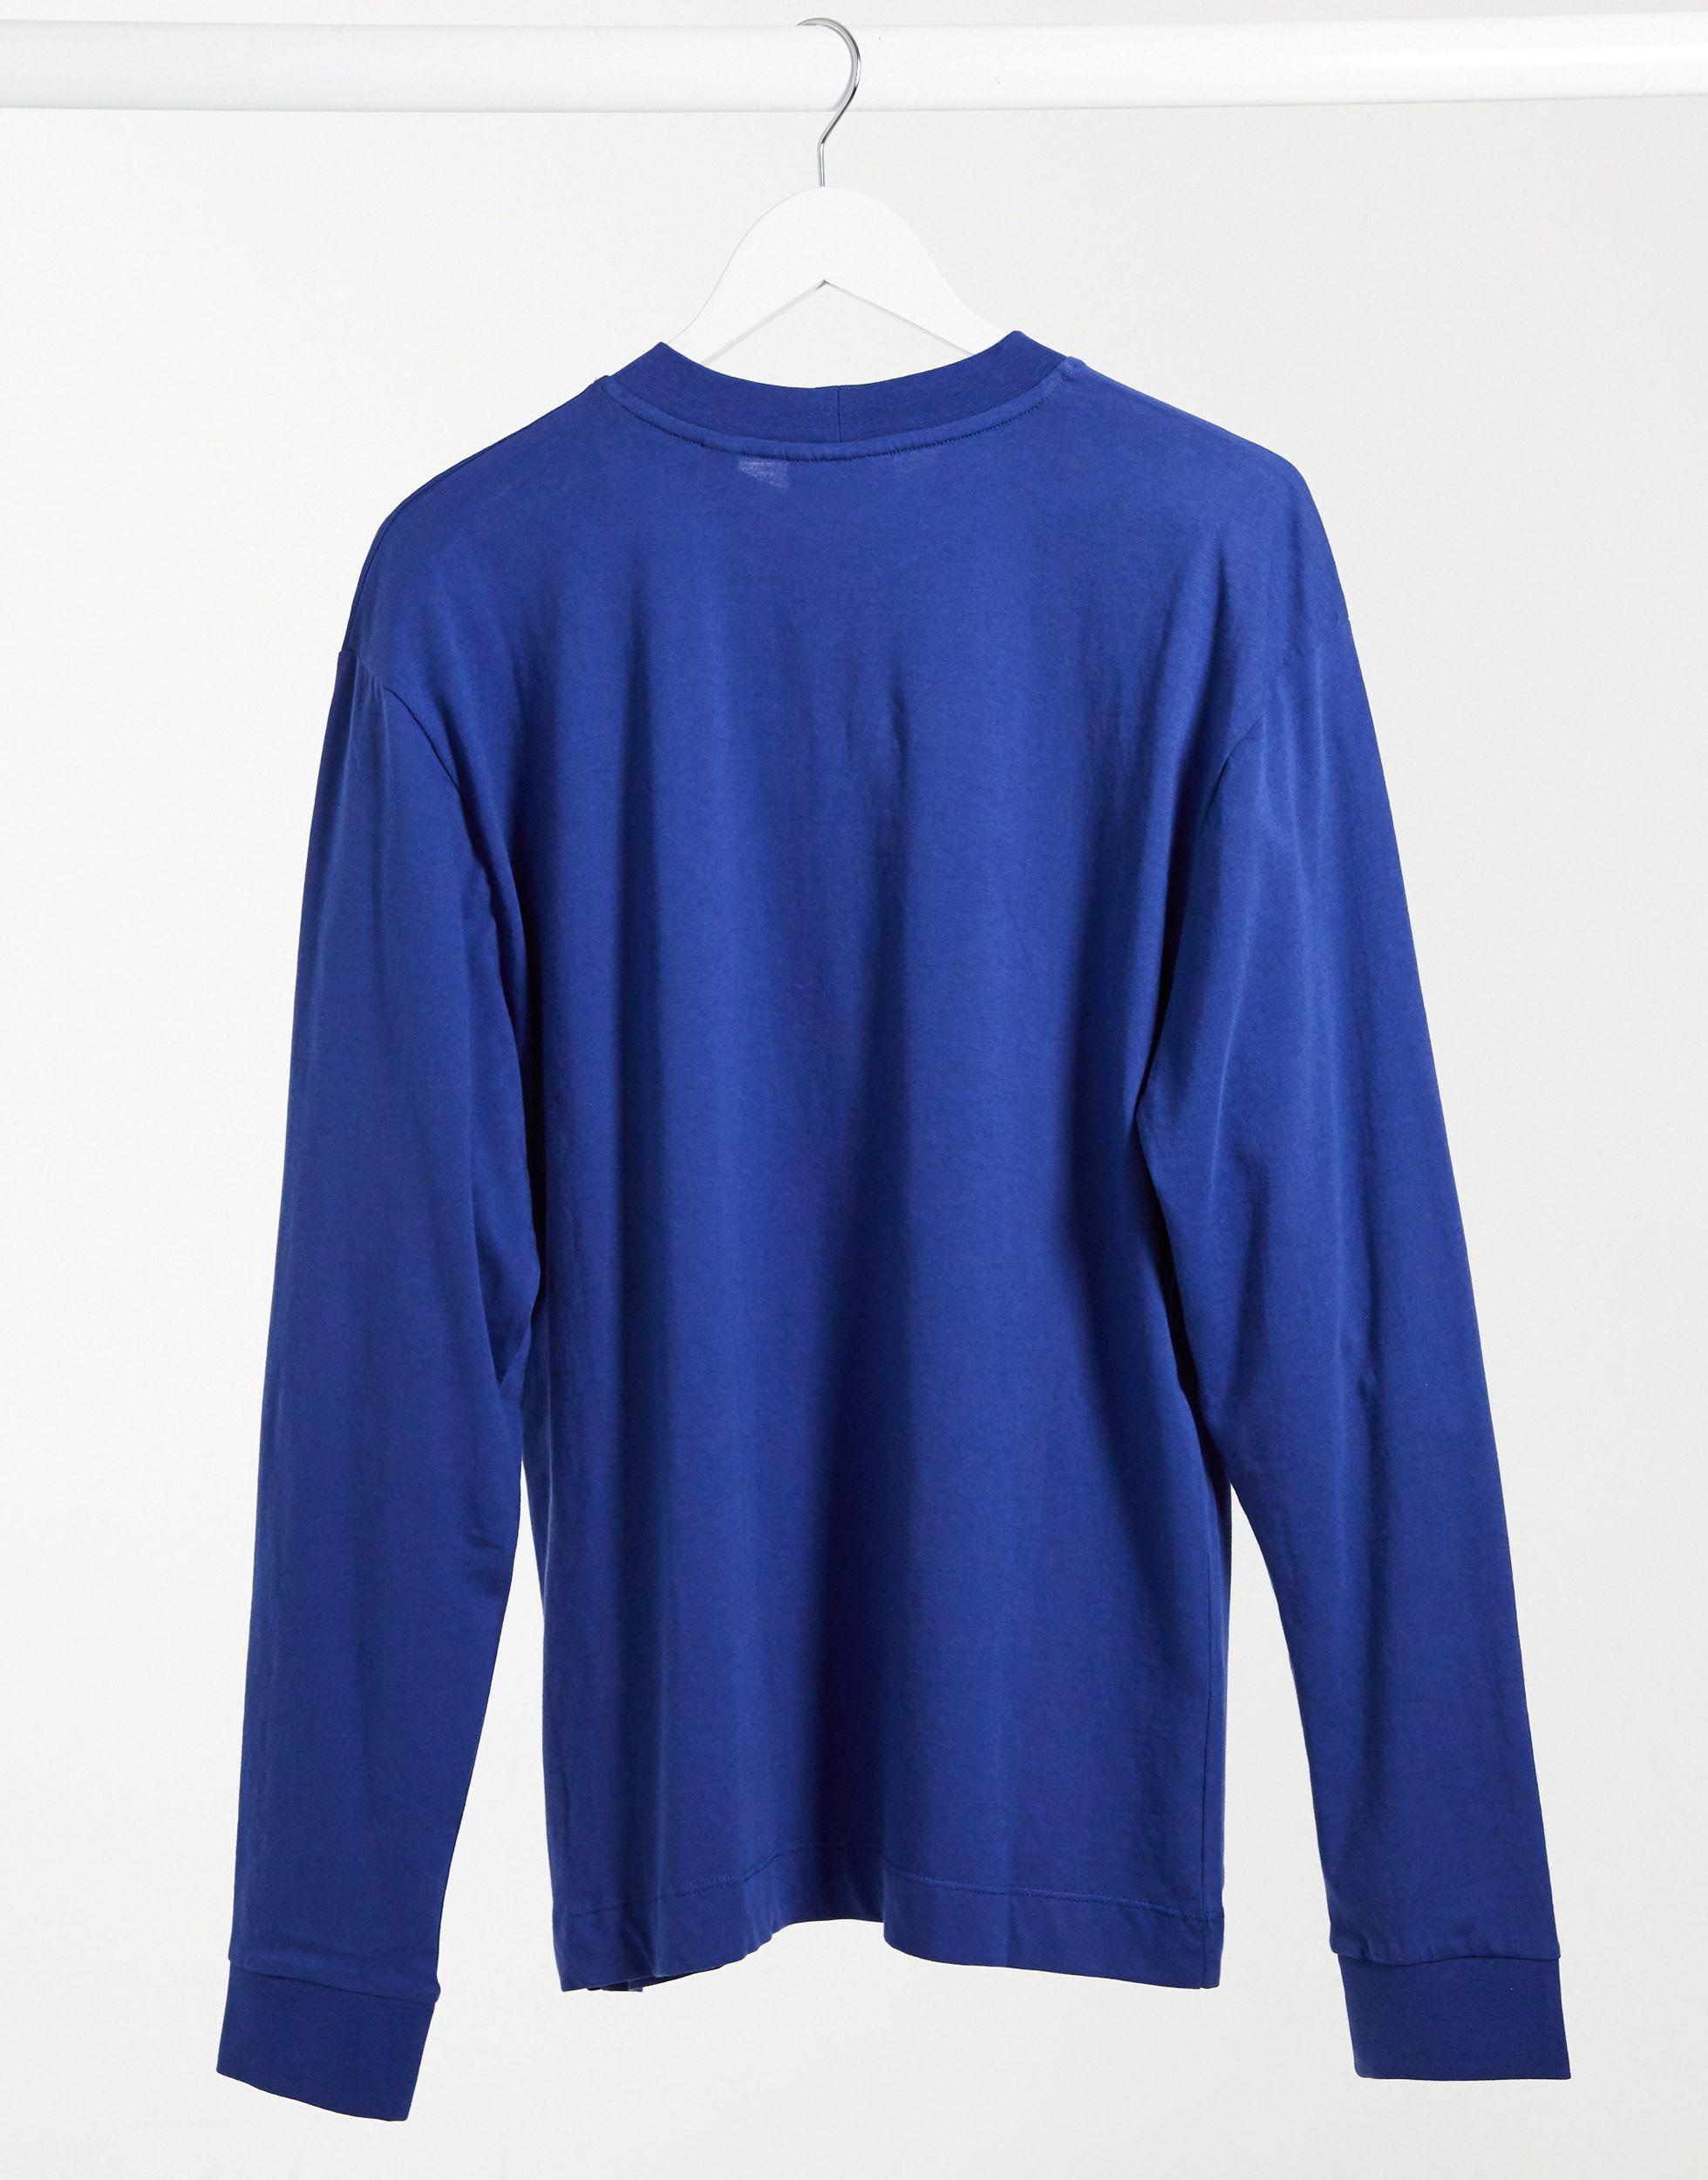 Collusion Unisex Long Sleeve T-shirt With Print in Blue - Lyst